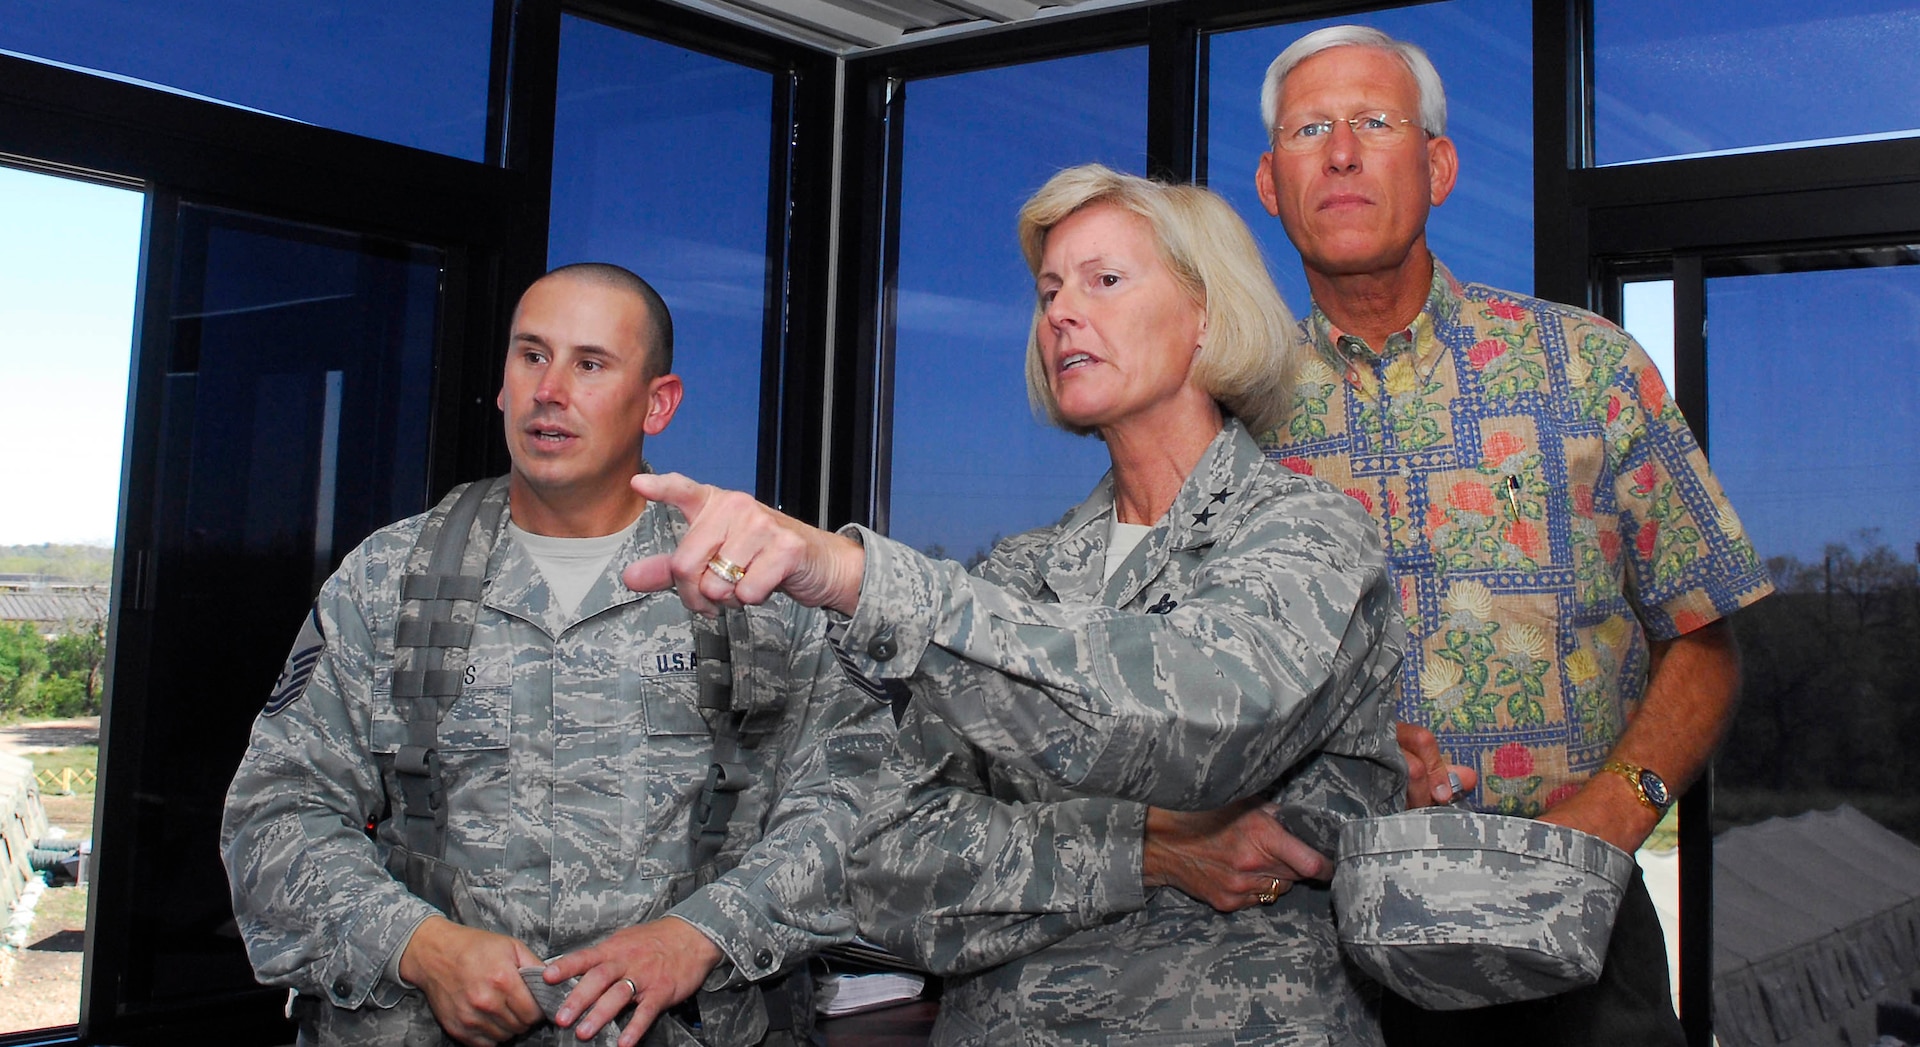 Maj. Gen. Mary Kay Hertog, 2nd Air Force commander, and her husband, retired Chief Master Sgt. Herm Hertog (right), view the Basic Expeditionary Airman Skills Training course from an observation tower on Lackland's Training Annex Nov. 17. The tour of the BEAST facilites, led by Master Sgt. James Woods, 319th Training Squadron (left), was part of the general's three-day orientation of the 37th Training Wing. (U.S. Air Force photo/Alan Boedeker)